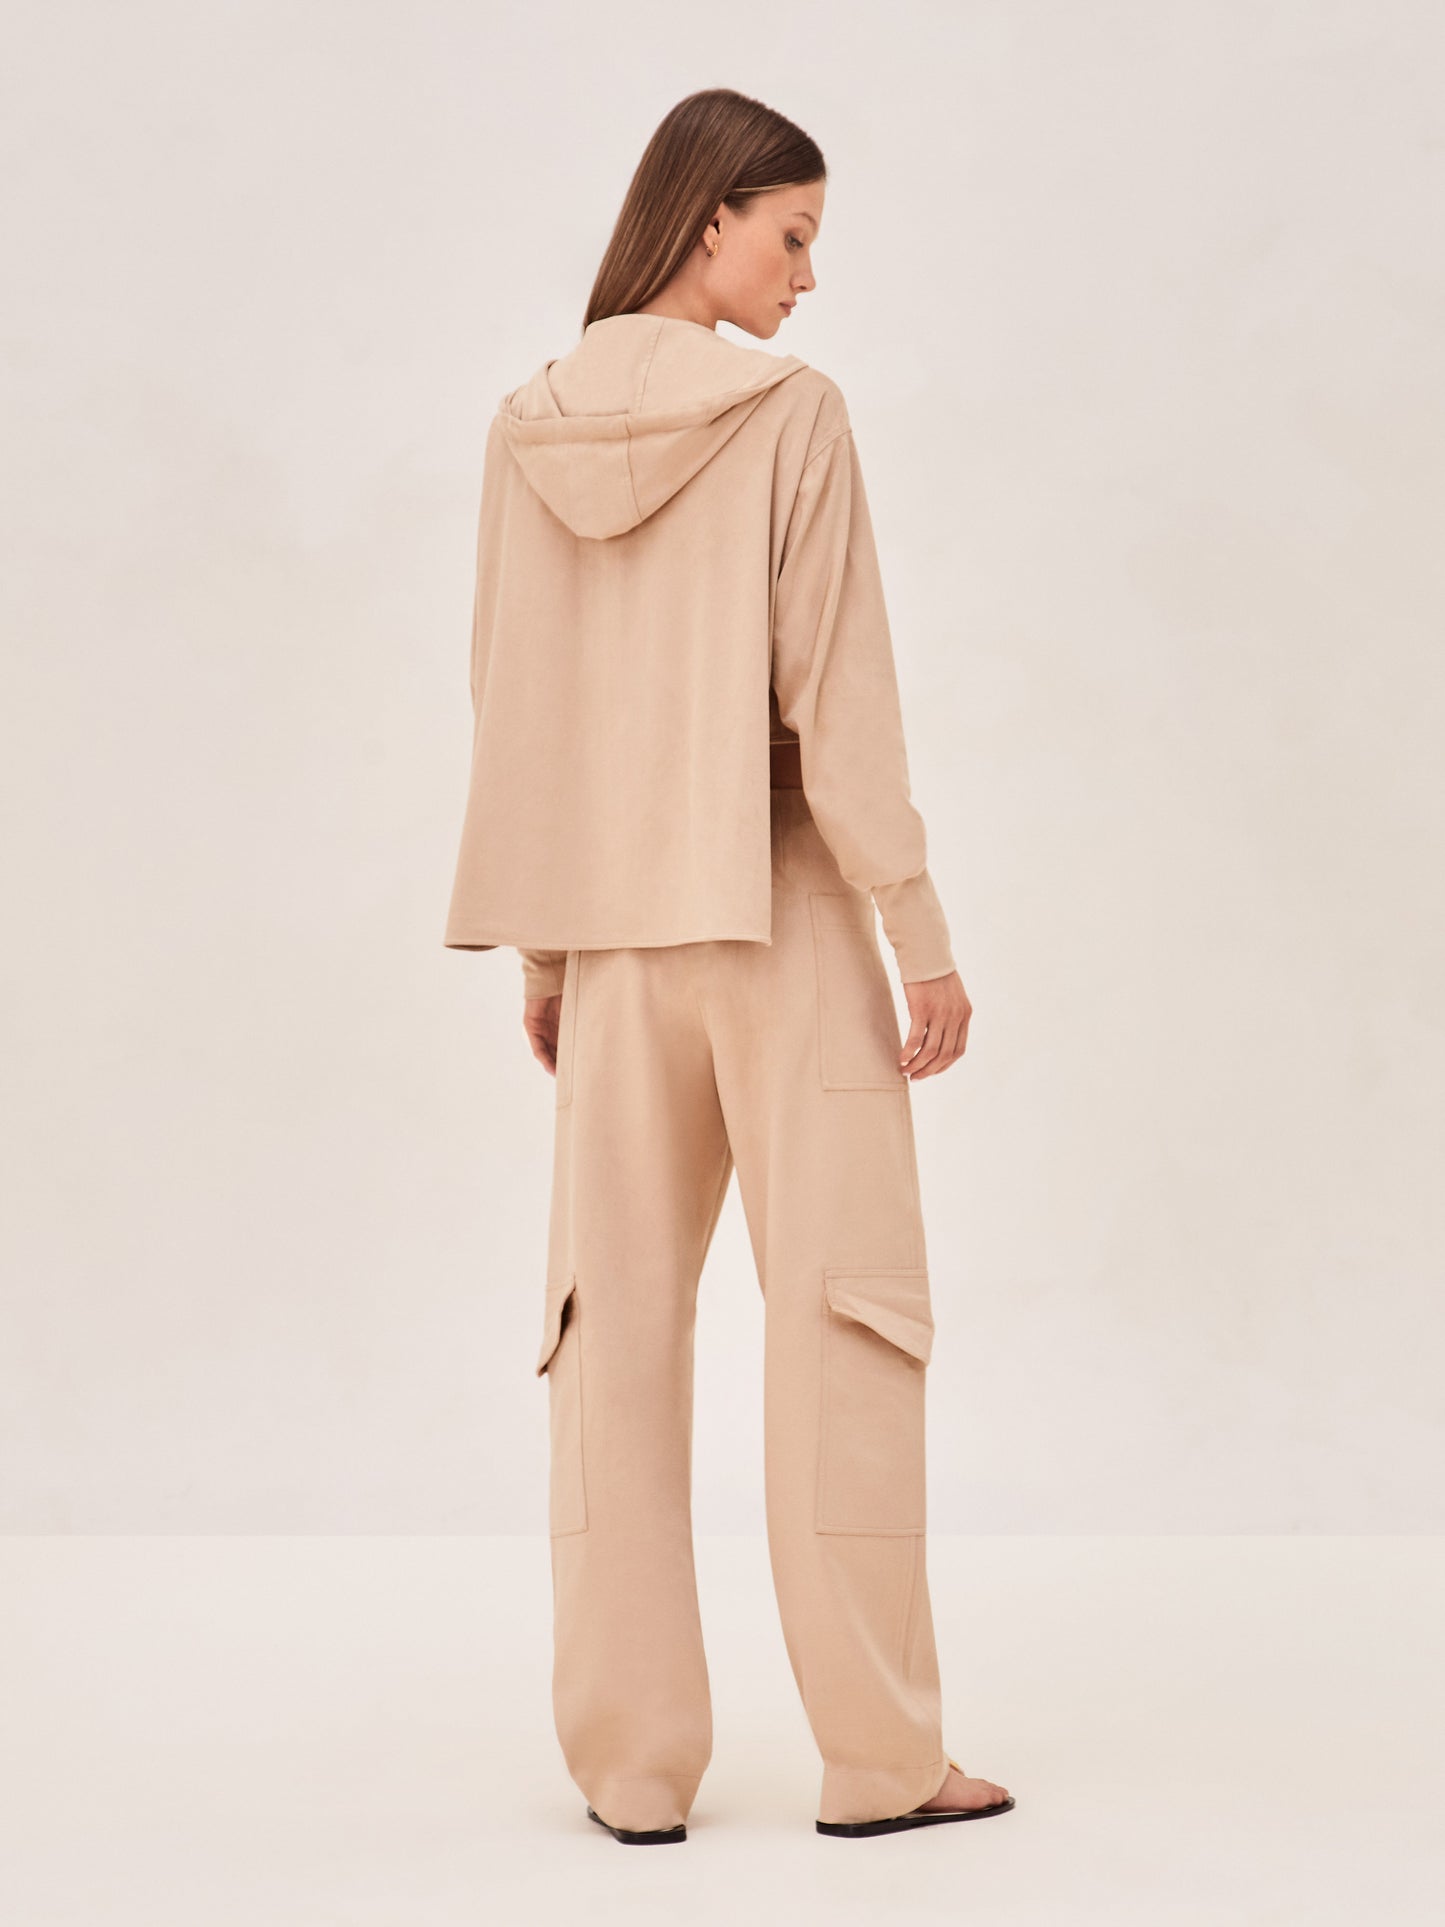 ALEXIS Suda top with zipper and hood. in camel